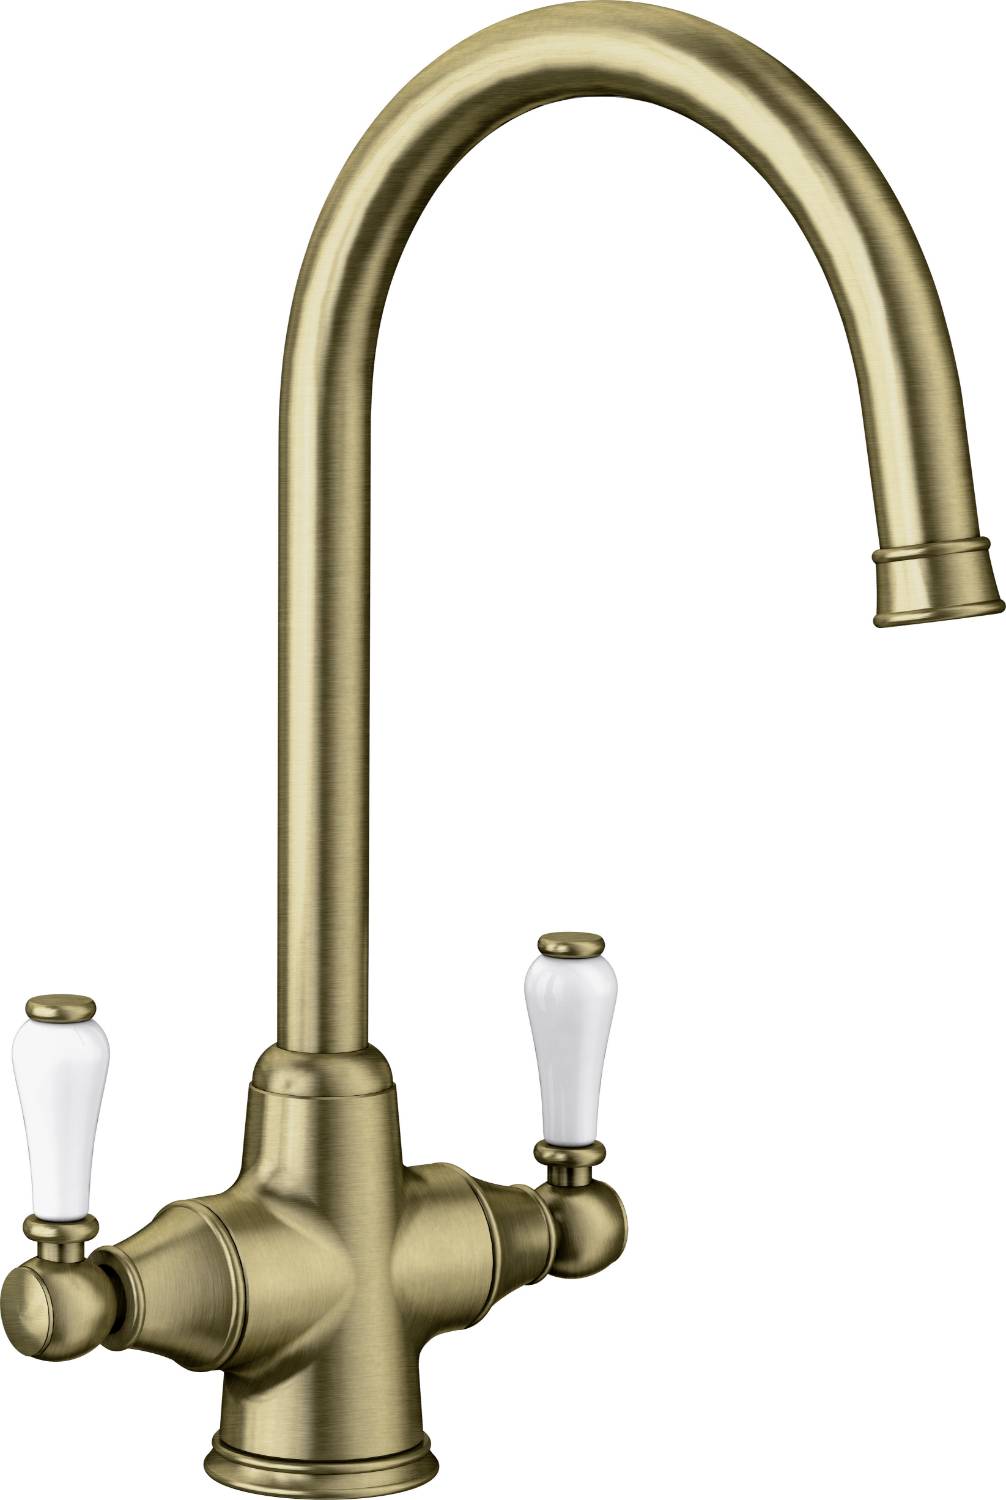 Vicus Twin Lever Mixer Tap